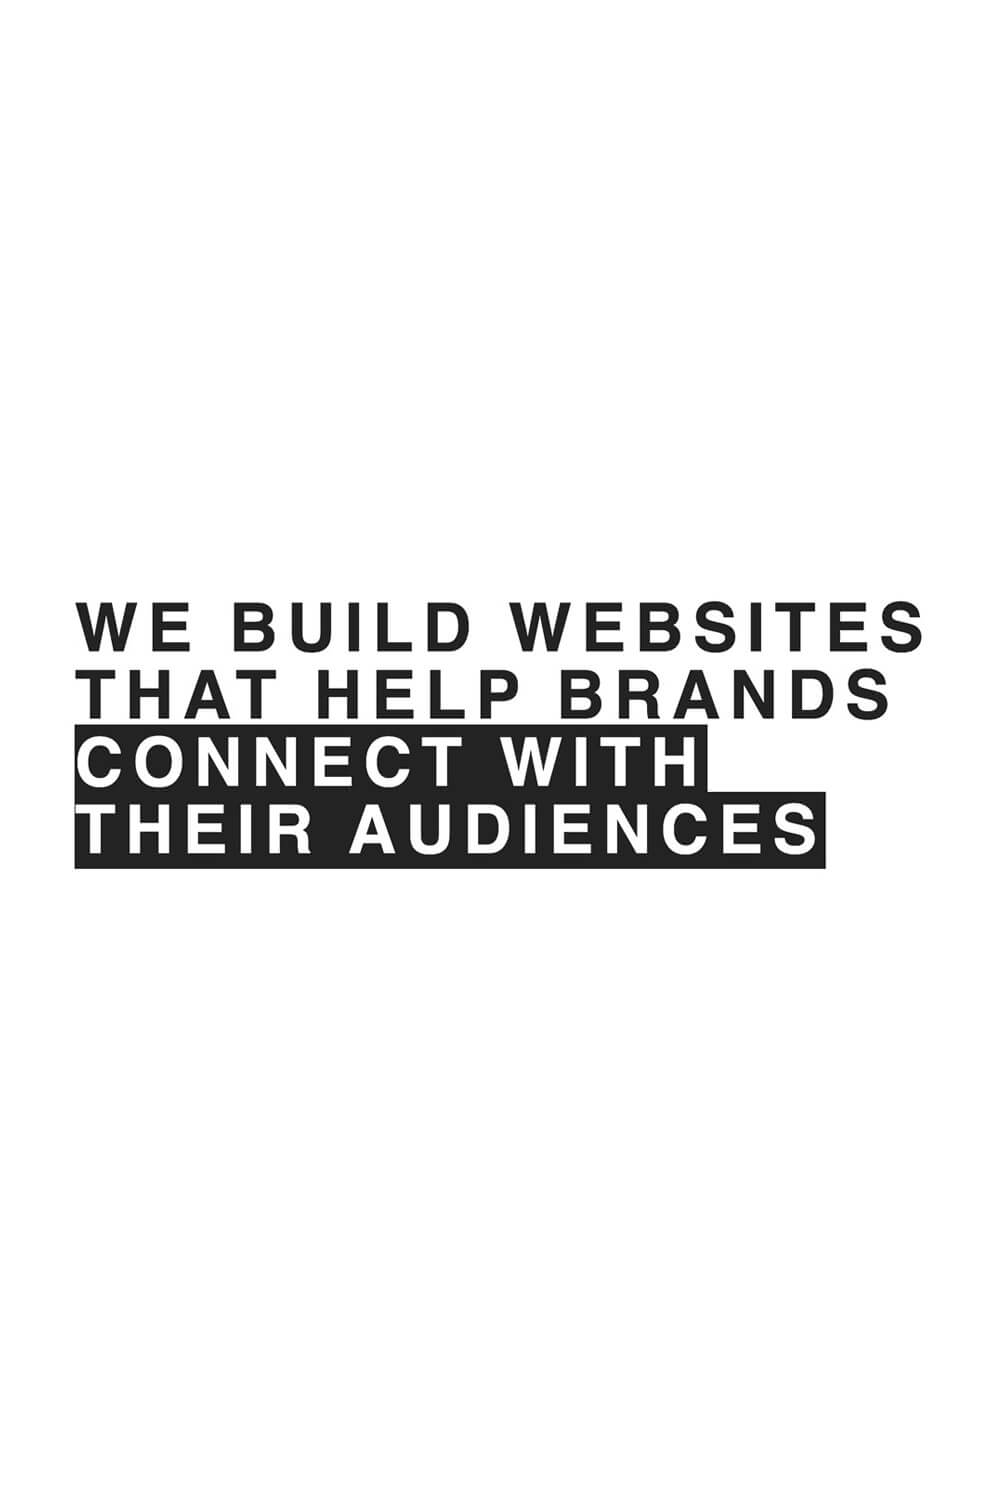 We build websites that help brands connect with audiences